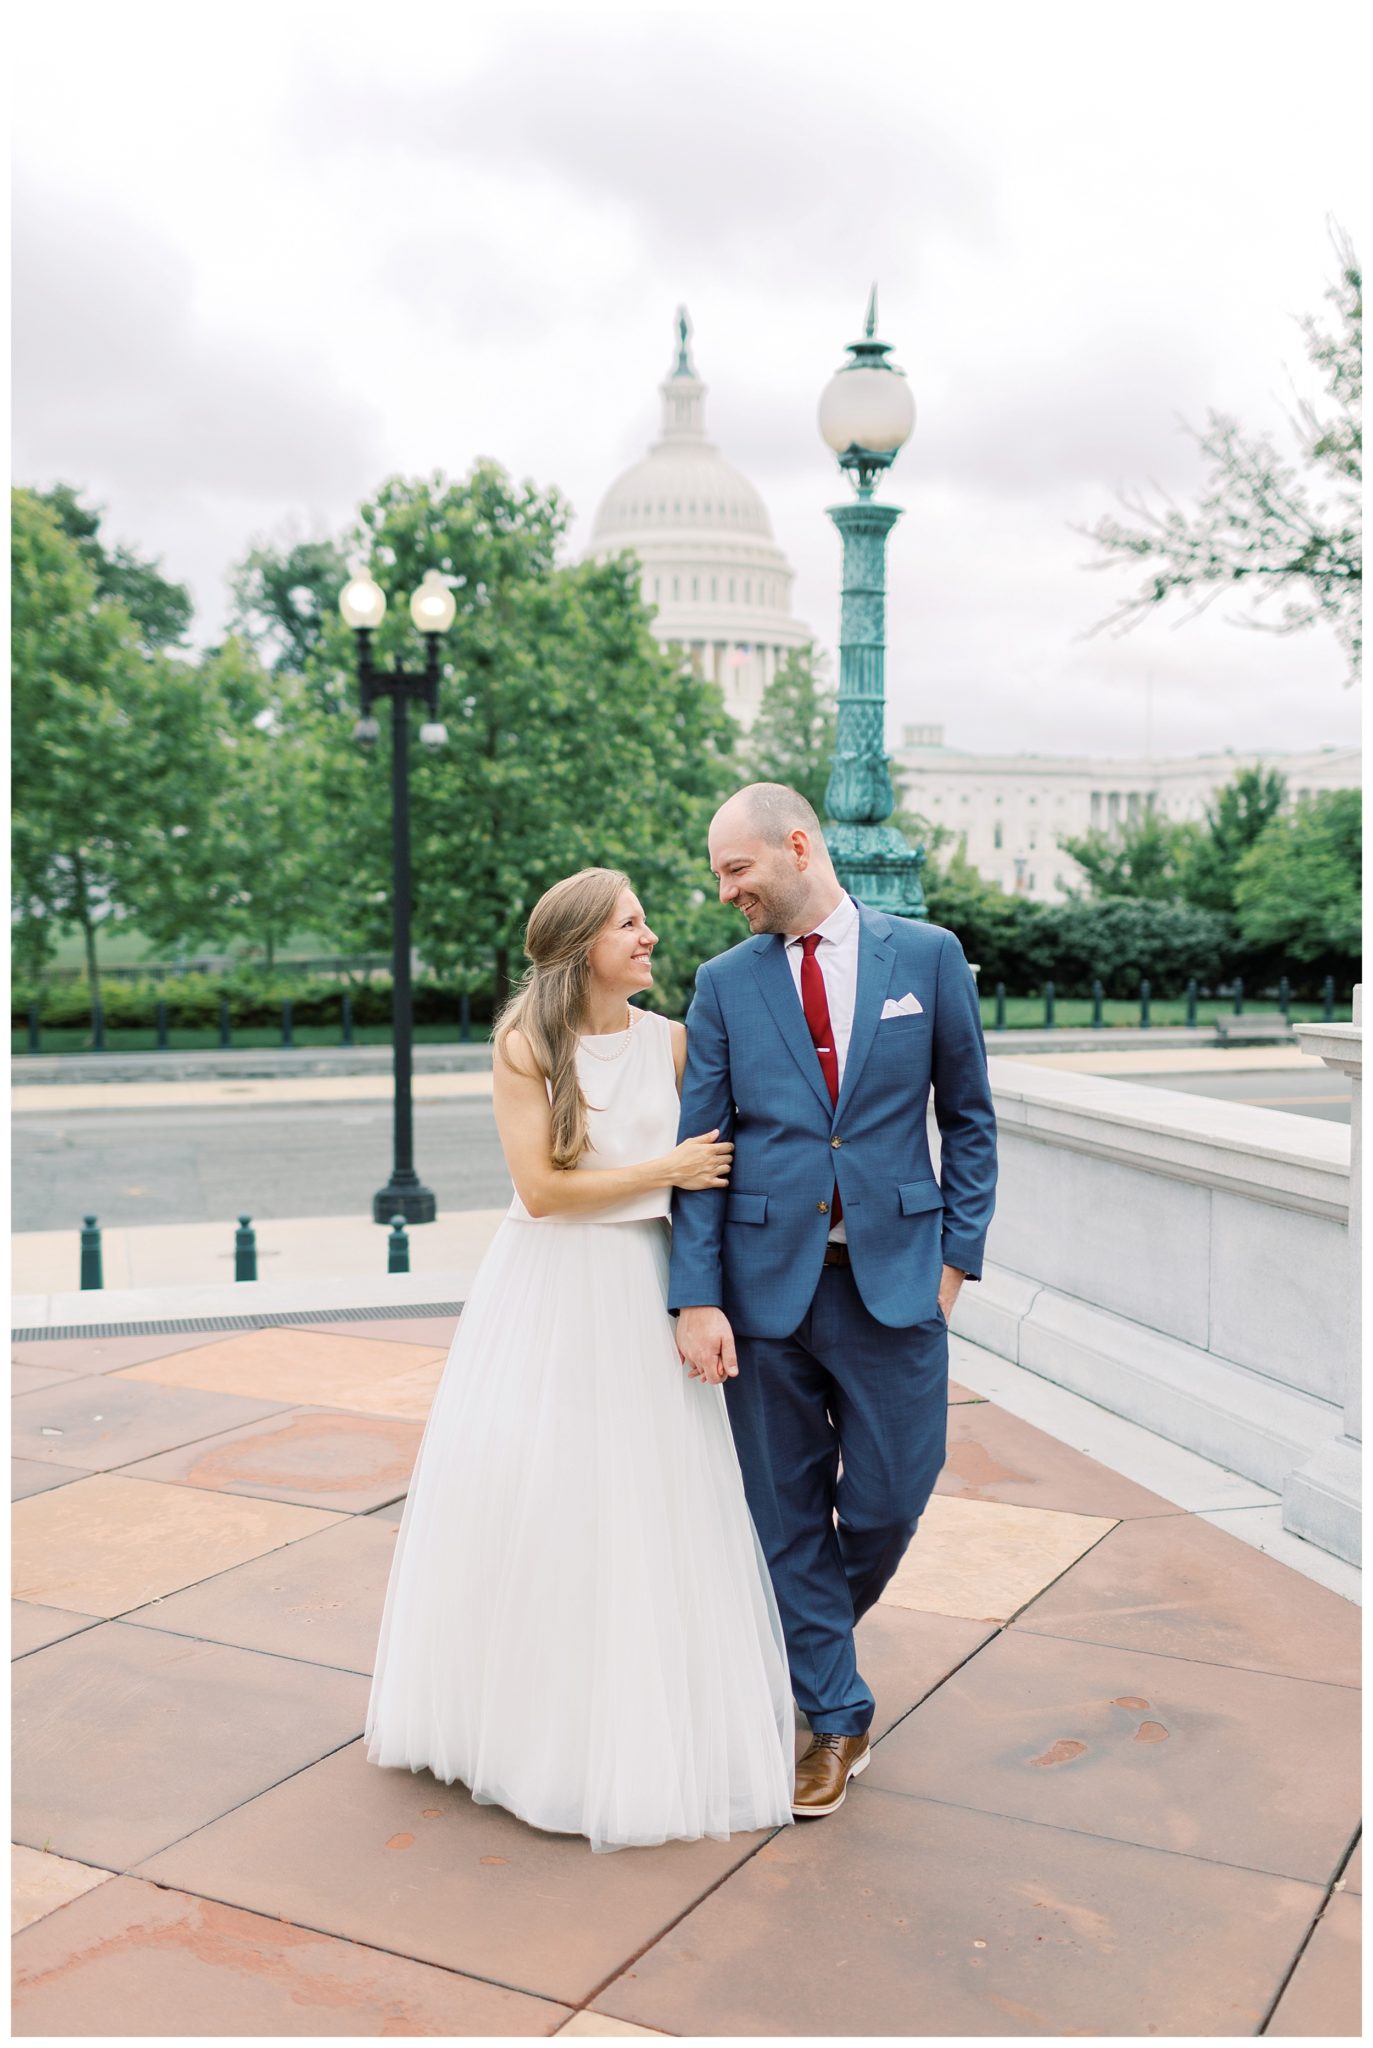 Capitol Hill Wedding Supreme Court Newlywed Pictures Library of